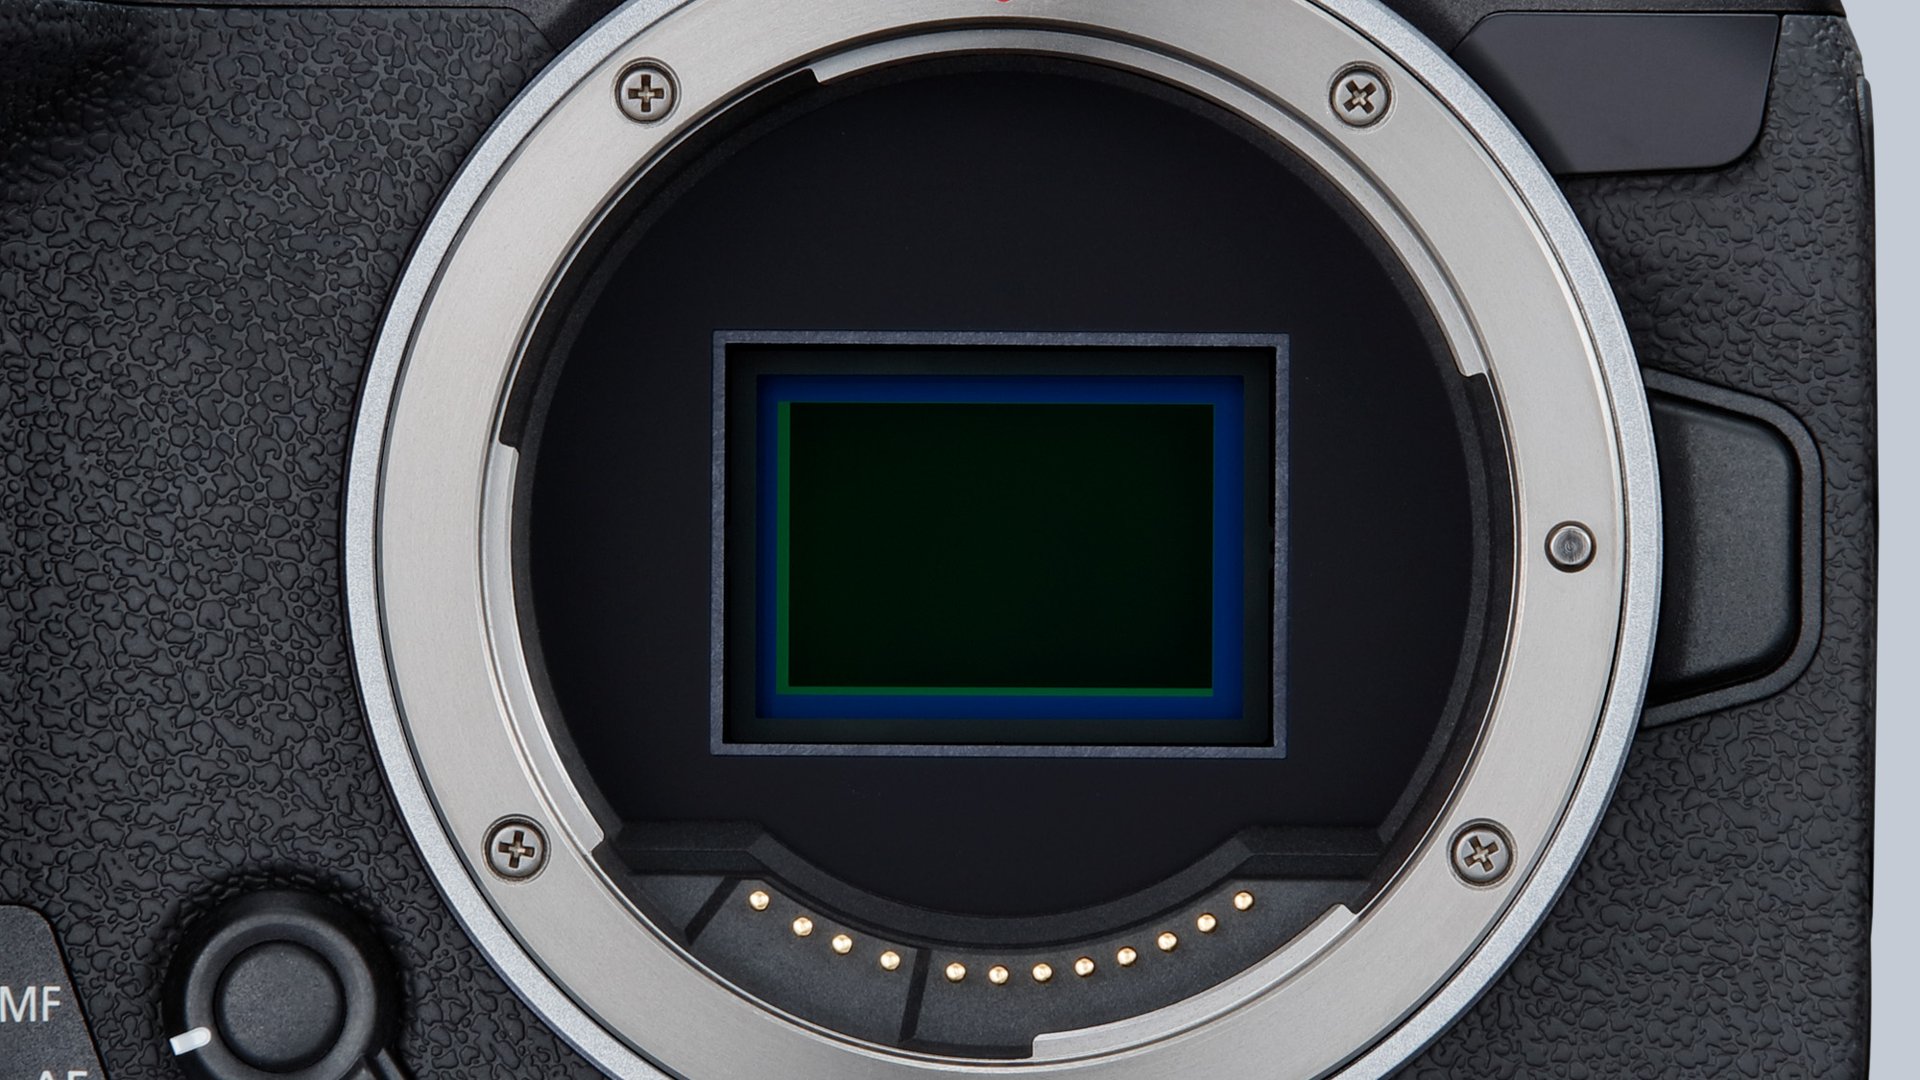 The lens mount on a Canon mirrorless camera